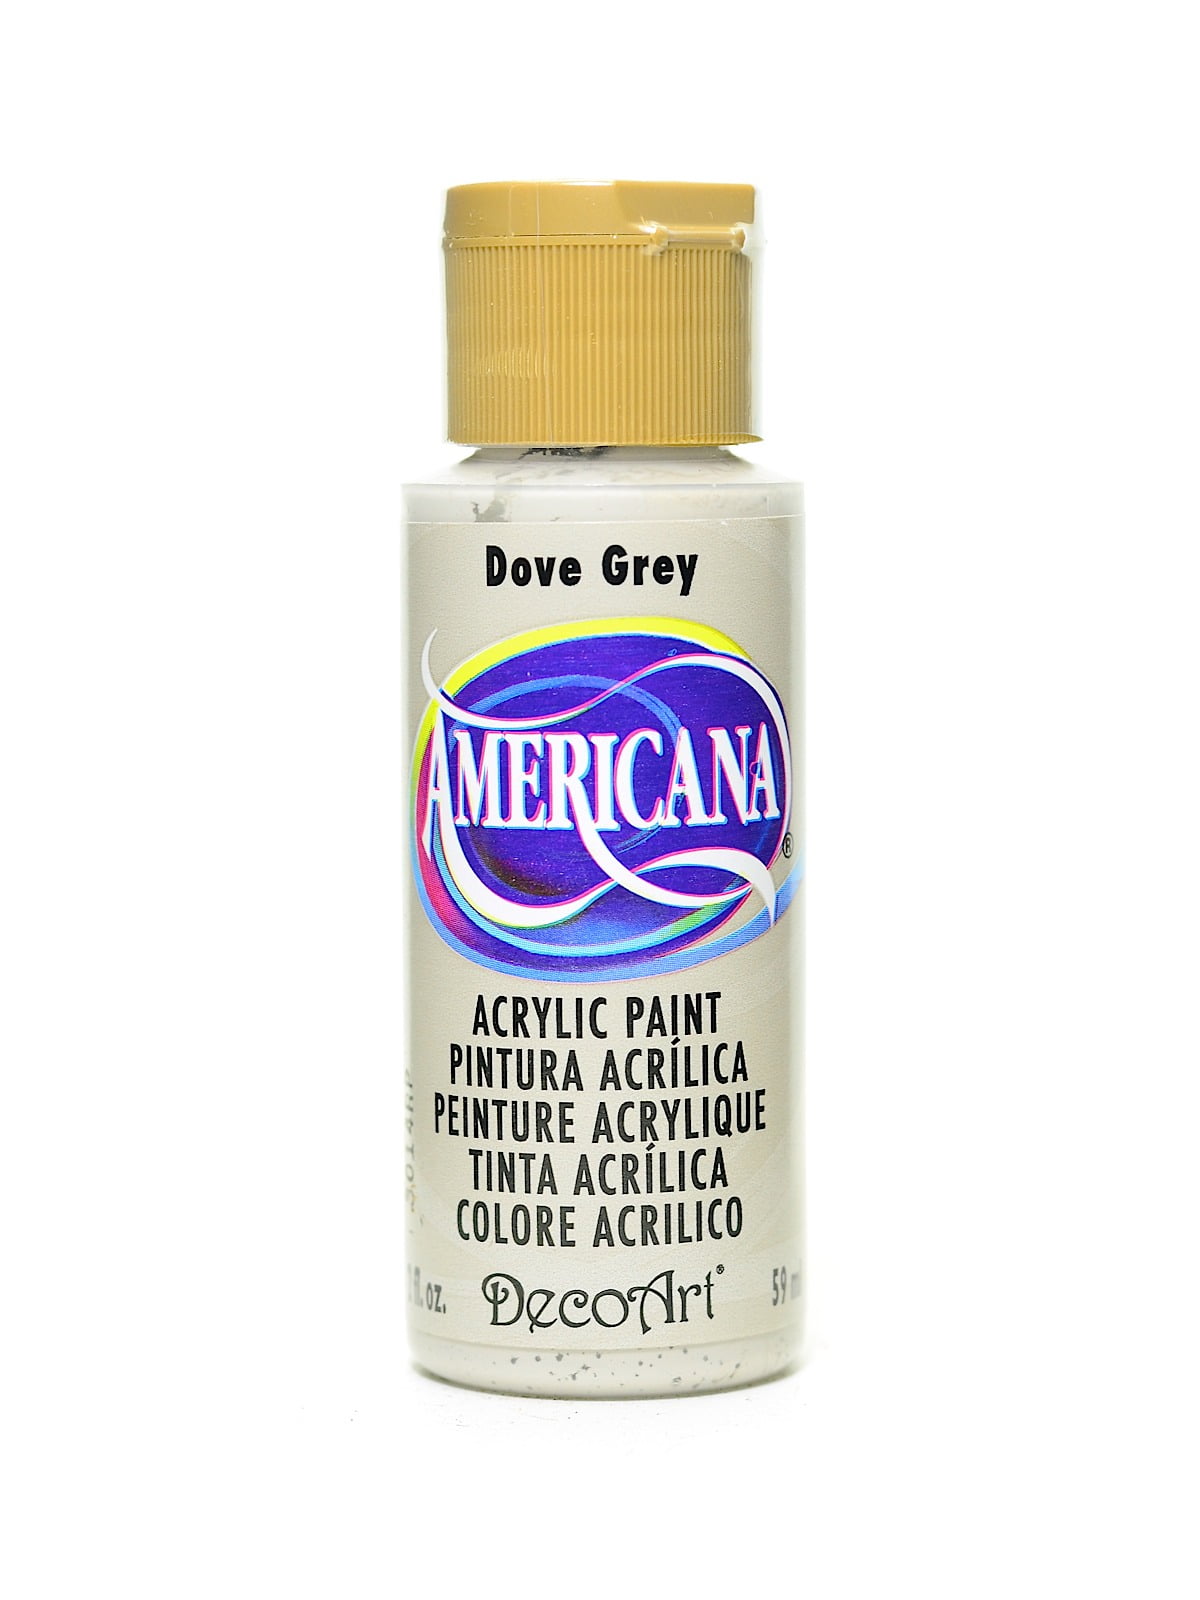 Deco Art Americana Acrylic Paint, 2-Ounce, Country Red - Americana Acrylic  Paint, 2-Ounce, Country Red . shop for Deco Art products in India.